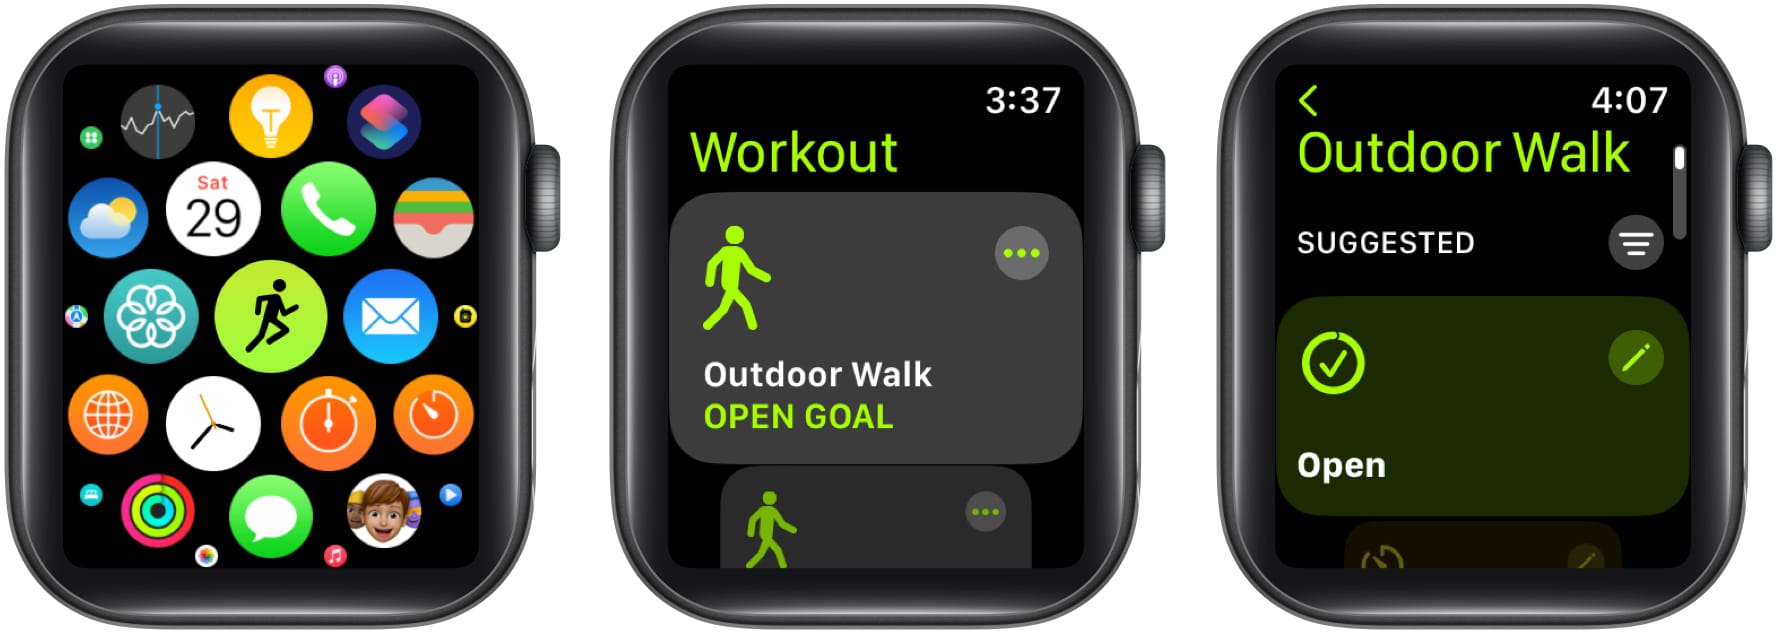 Go to Workout app, select three dots icon, choose pencil icon